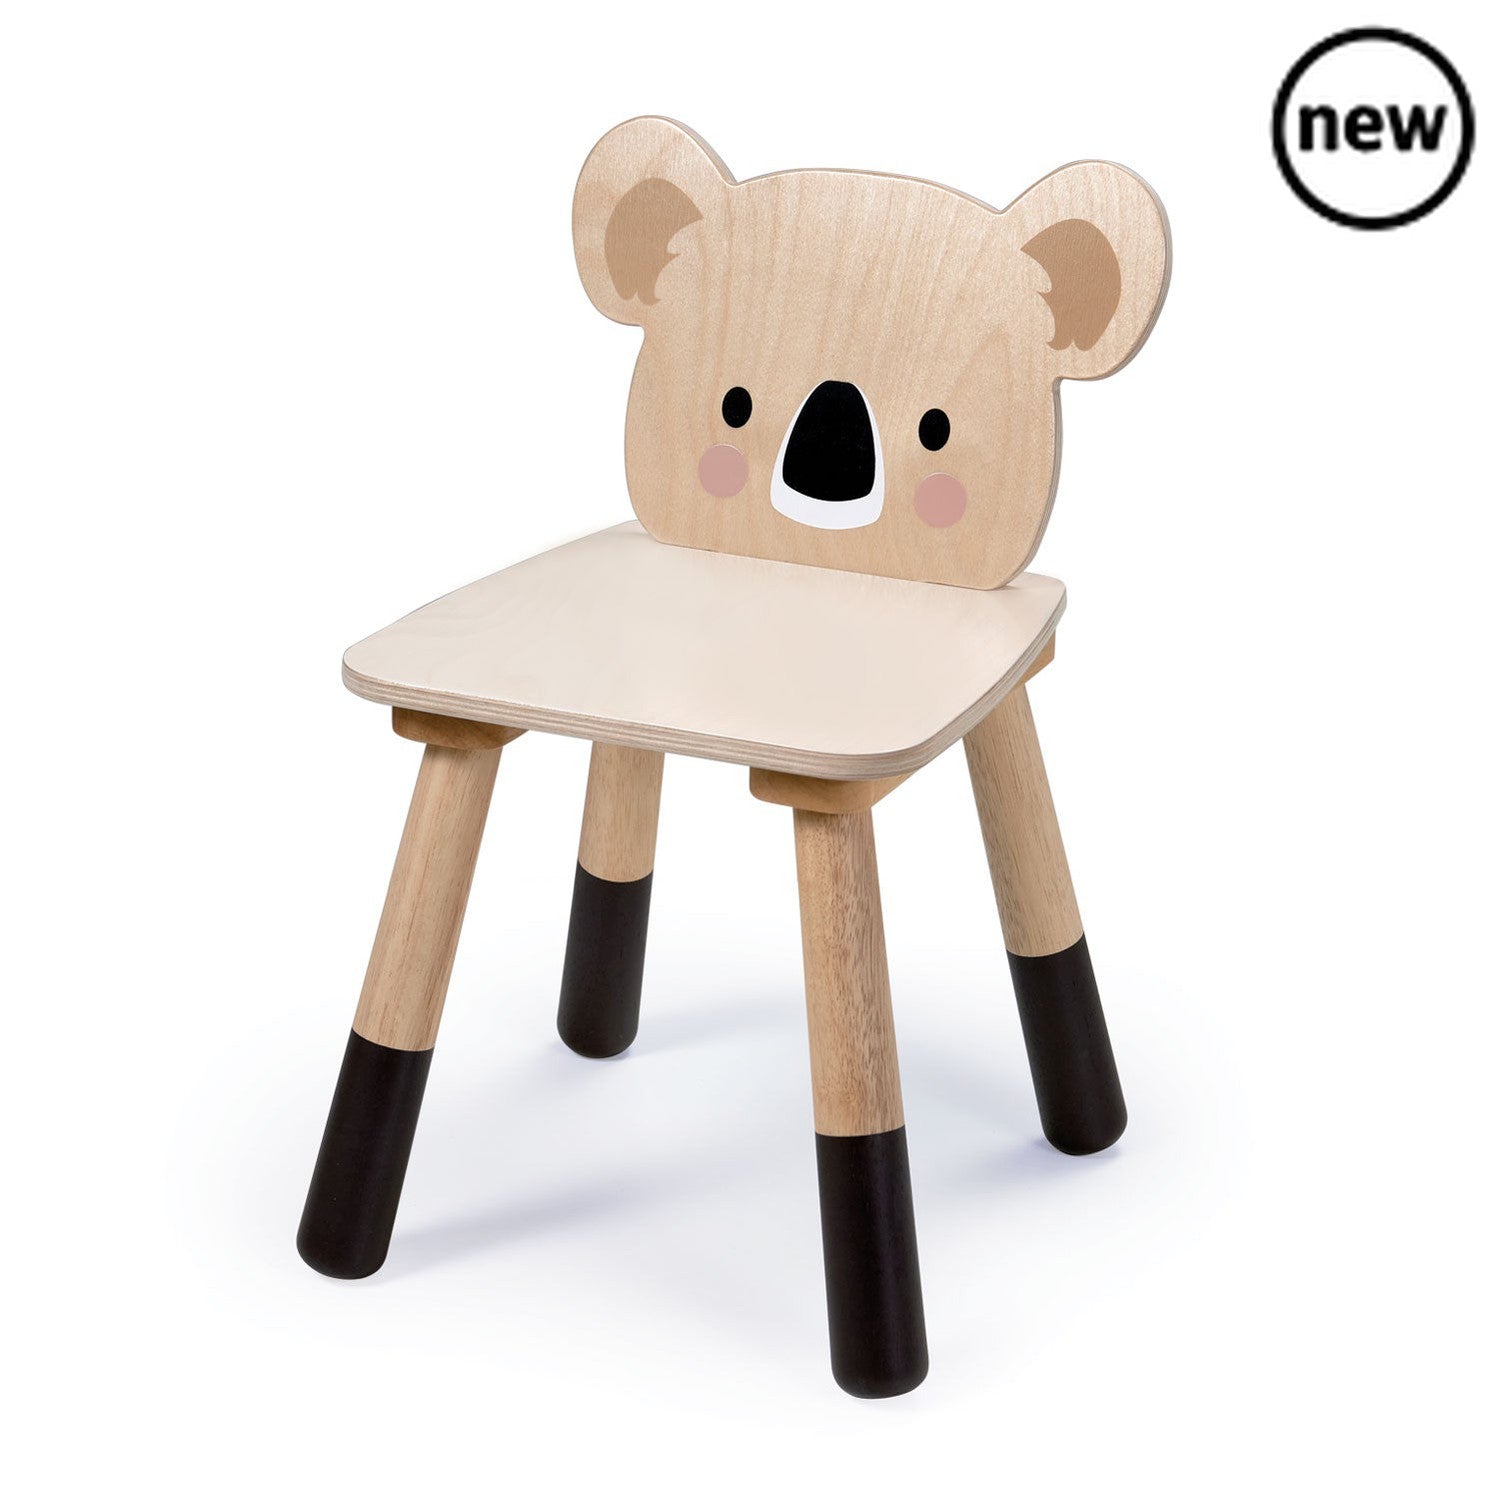 Tenderleaf Toys Wooden Forest Koala Chair, This fun high quality plywood Koala chair by Tender Leaf Toys works perfectly with the Tender Leaf Toys Forest table, or your own small table. Children will love sitting in this very fun Koala chair! Self Assembly 0.345x0.102x0.325 meters, Tenderleaf Toys Wooden Forest Koala Chair,Wooden Toys,Tenderleaf, 